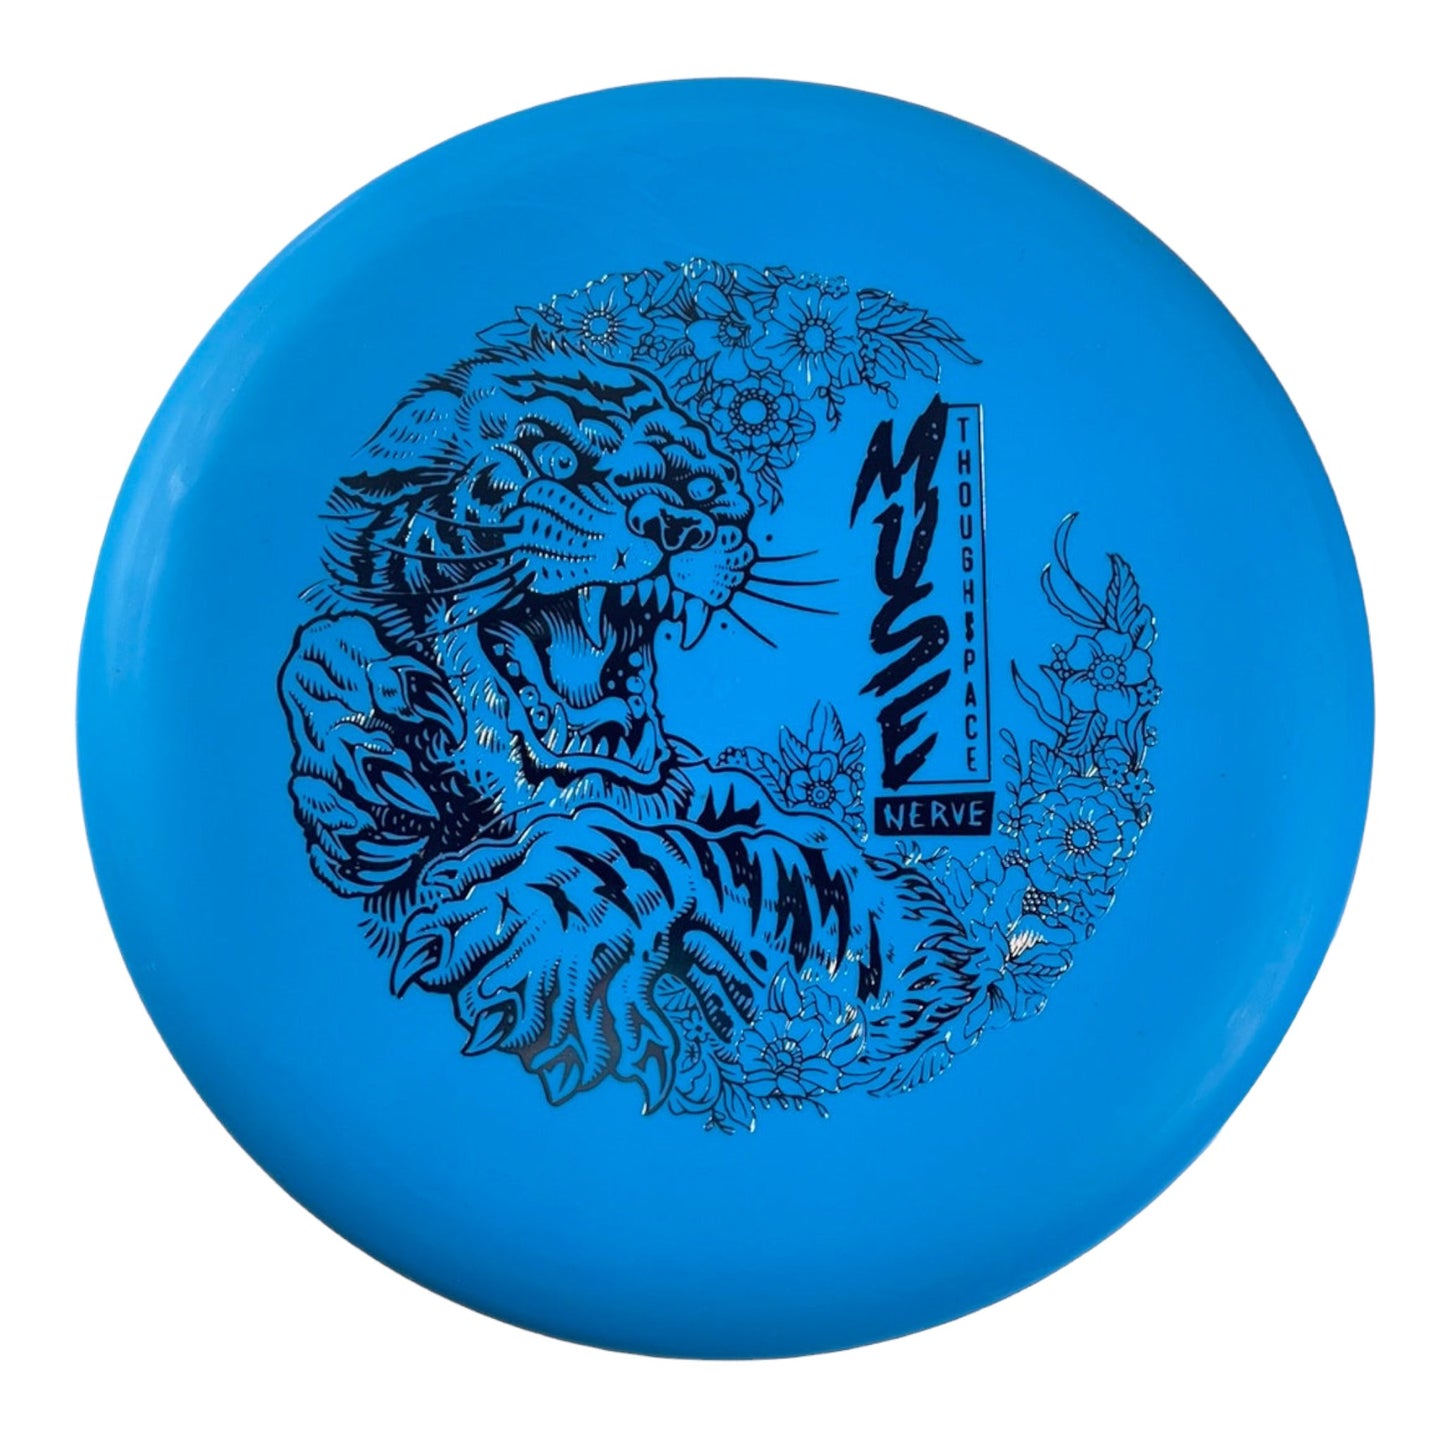 Thought Space Athletics Muse | Nerve | Blue/Silver 174g Disc Golf